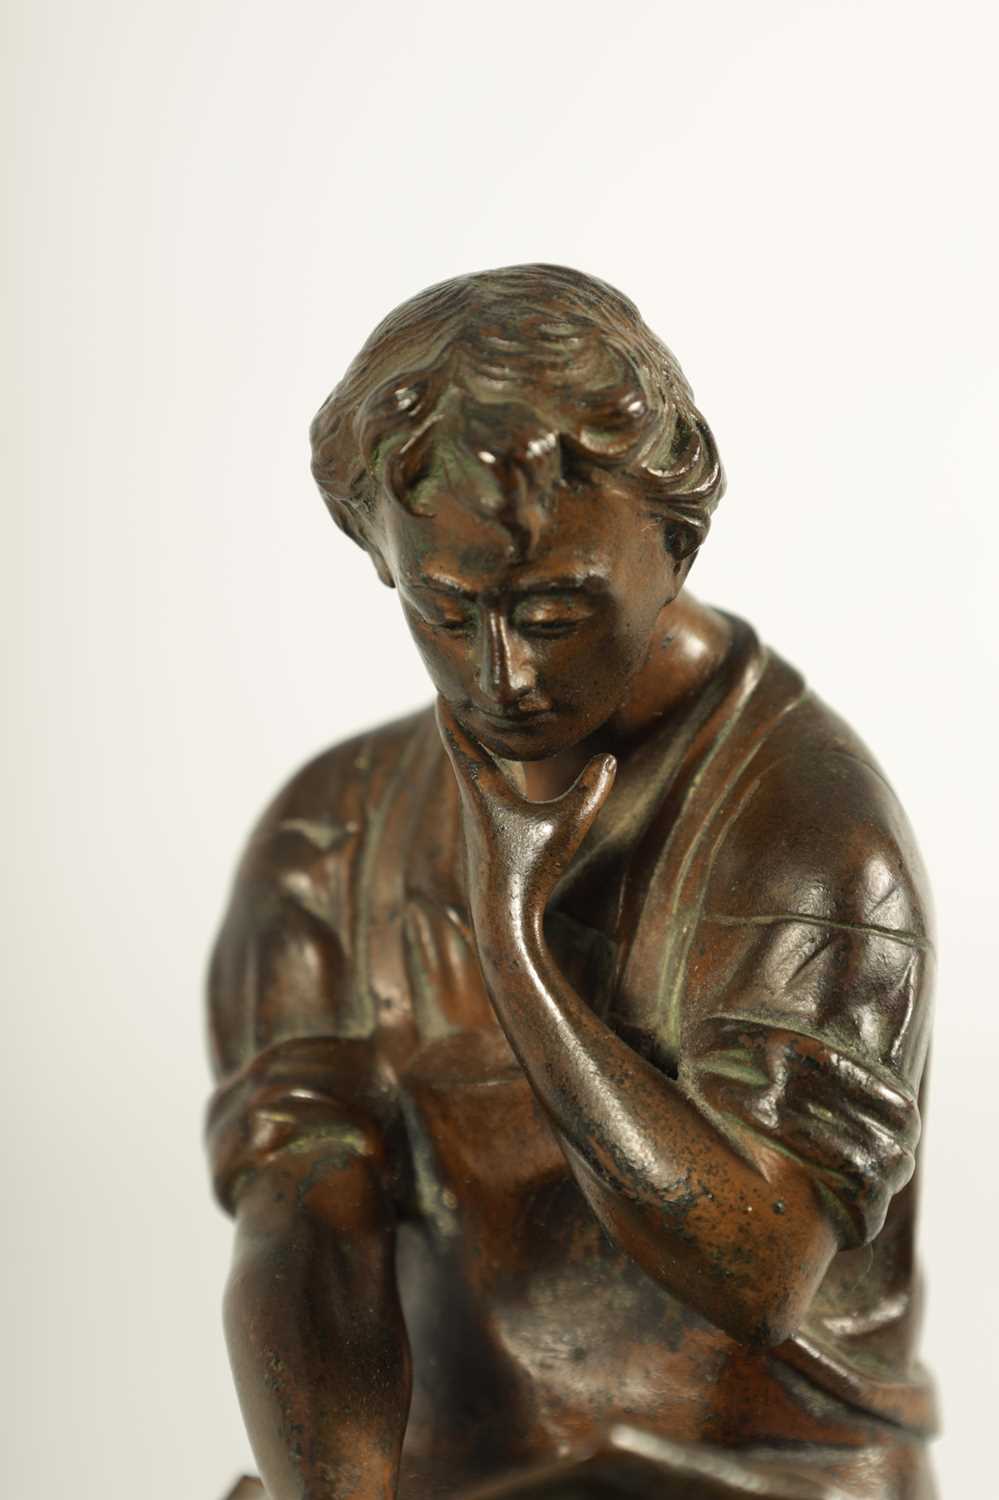 AN EARLY 20TH CENTURY FIGURAL BRONZE SCULPTURE OF AN INDUSTRIALIST - Image 3 of 11